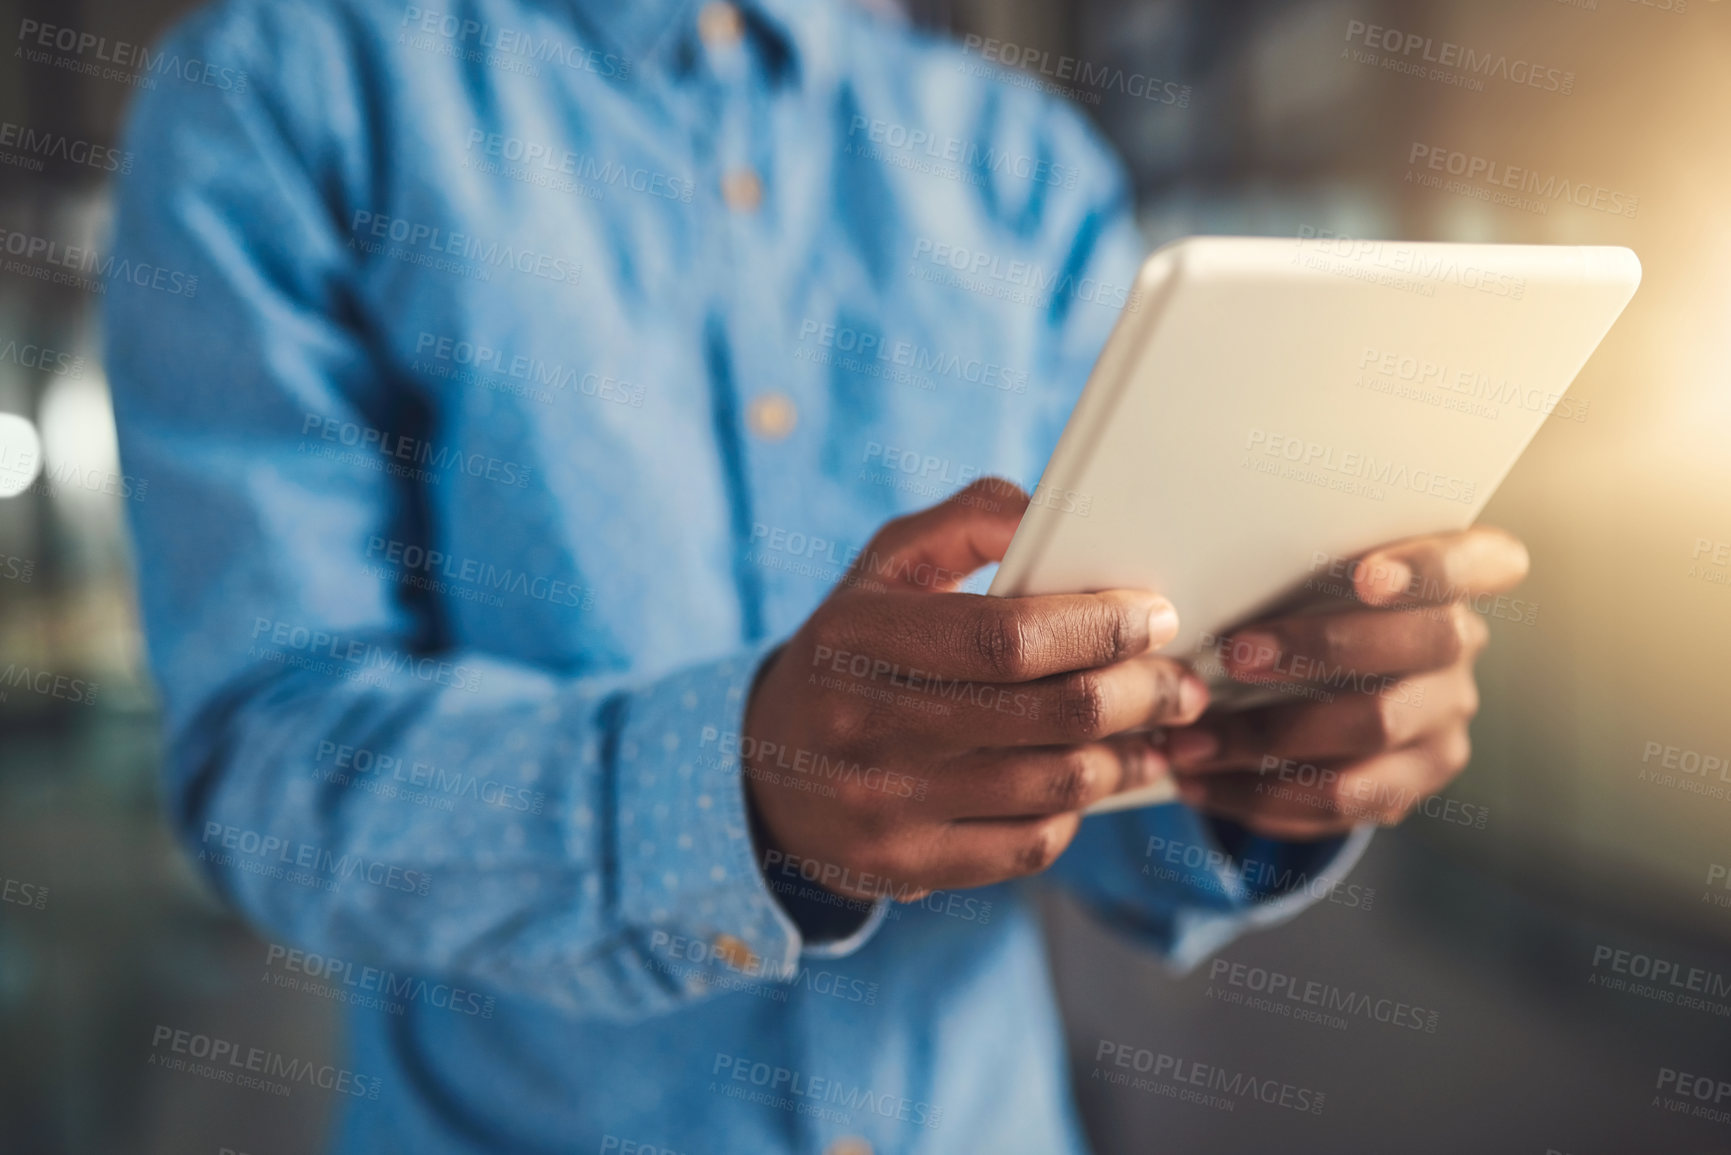 Buy stock photo Cropped shot of a businessman using his digital tablet